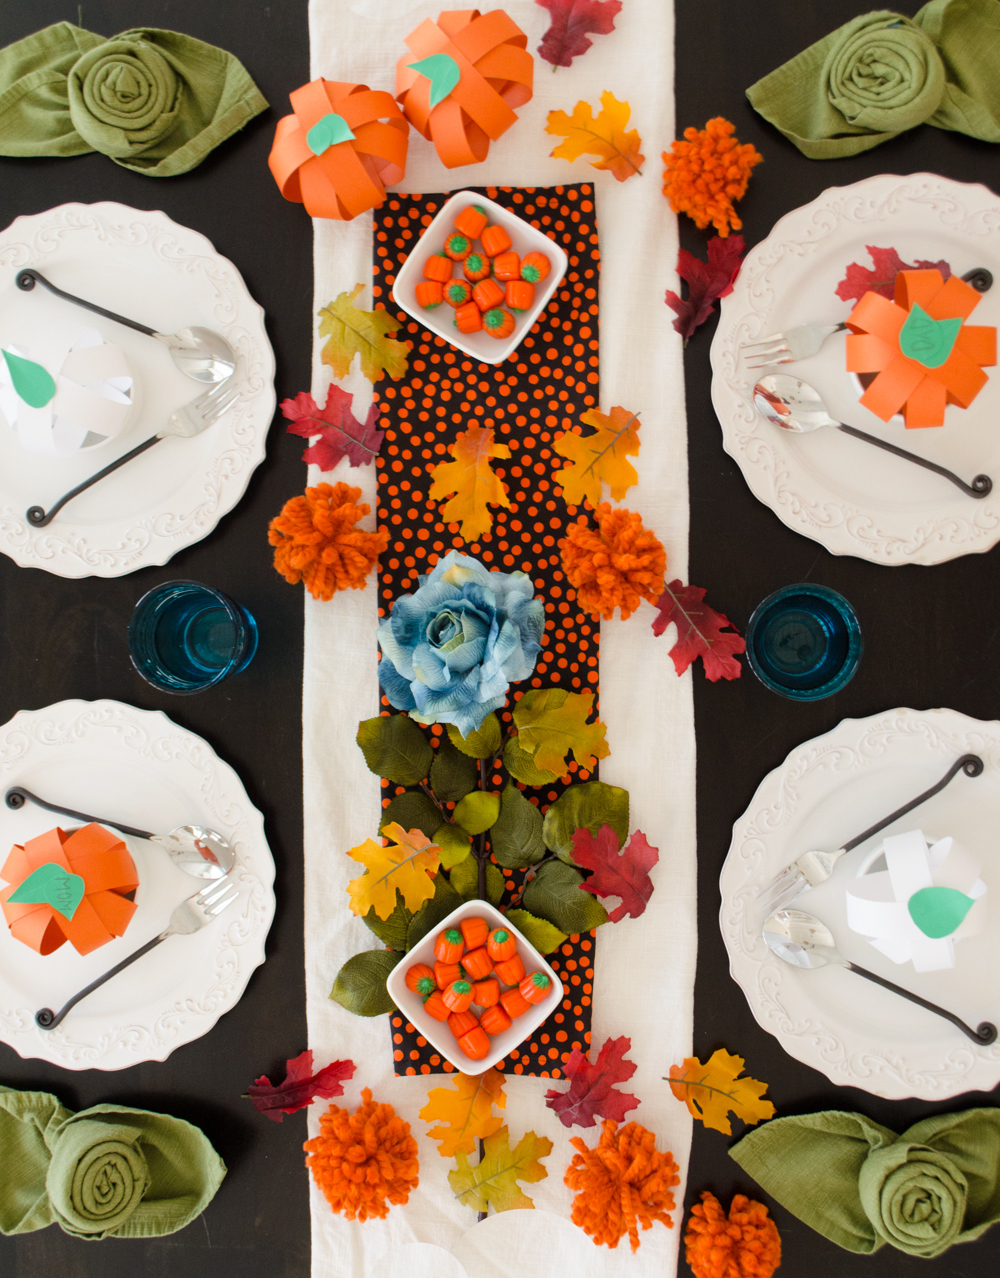 The Pumpkin Runner Tablescape from ChefSarahElizabeth.com